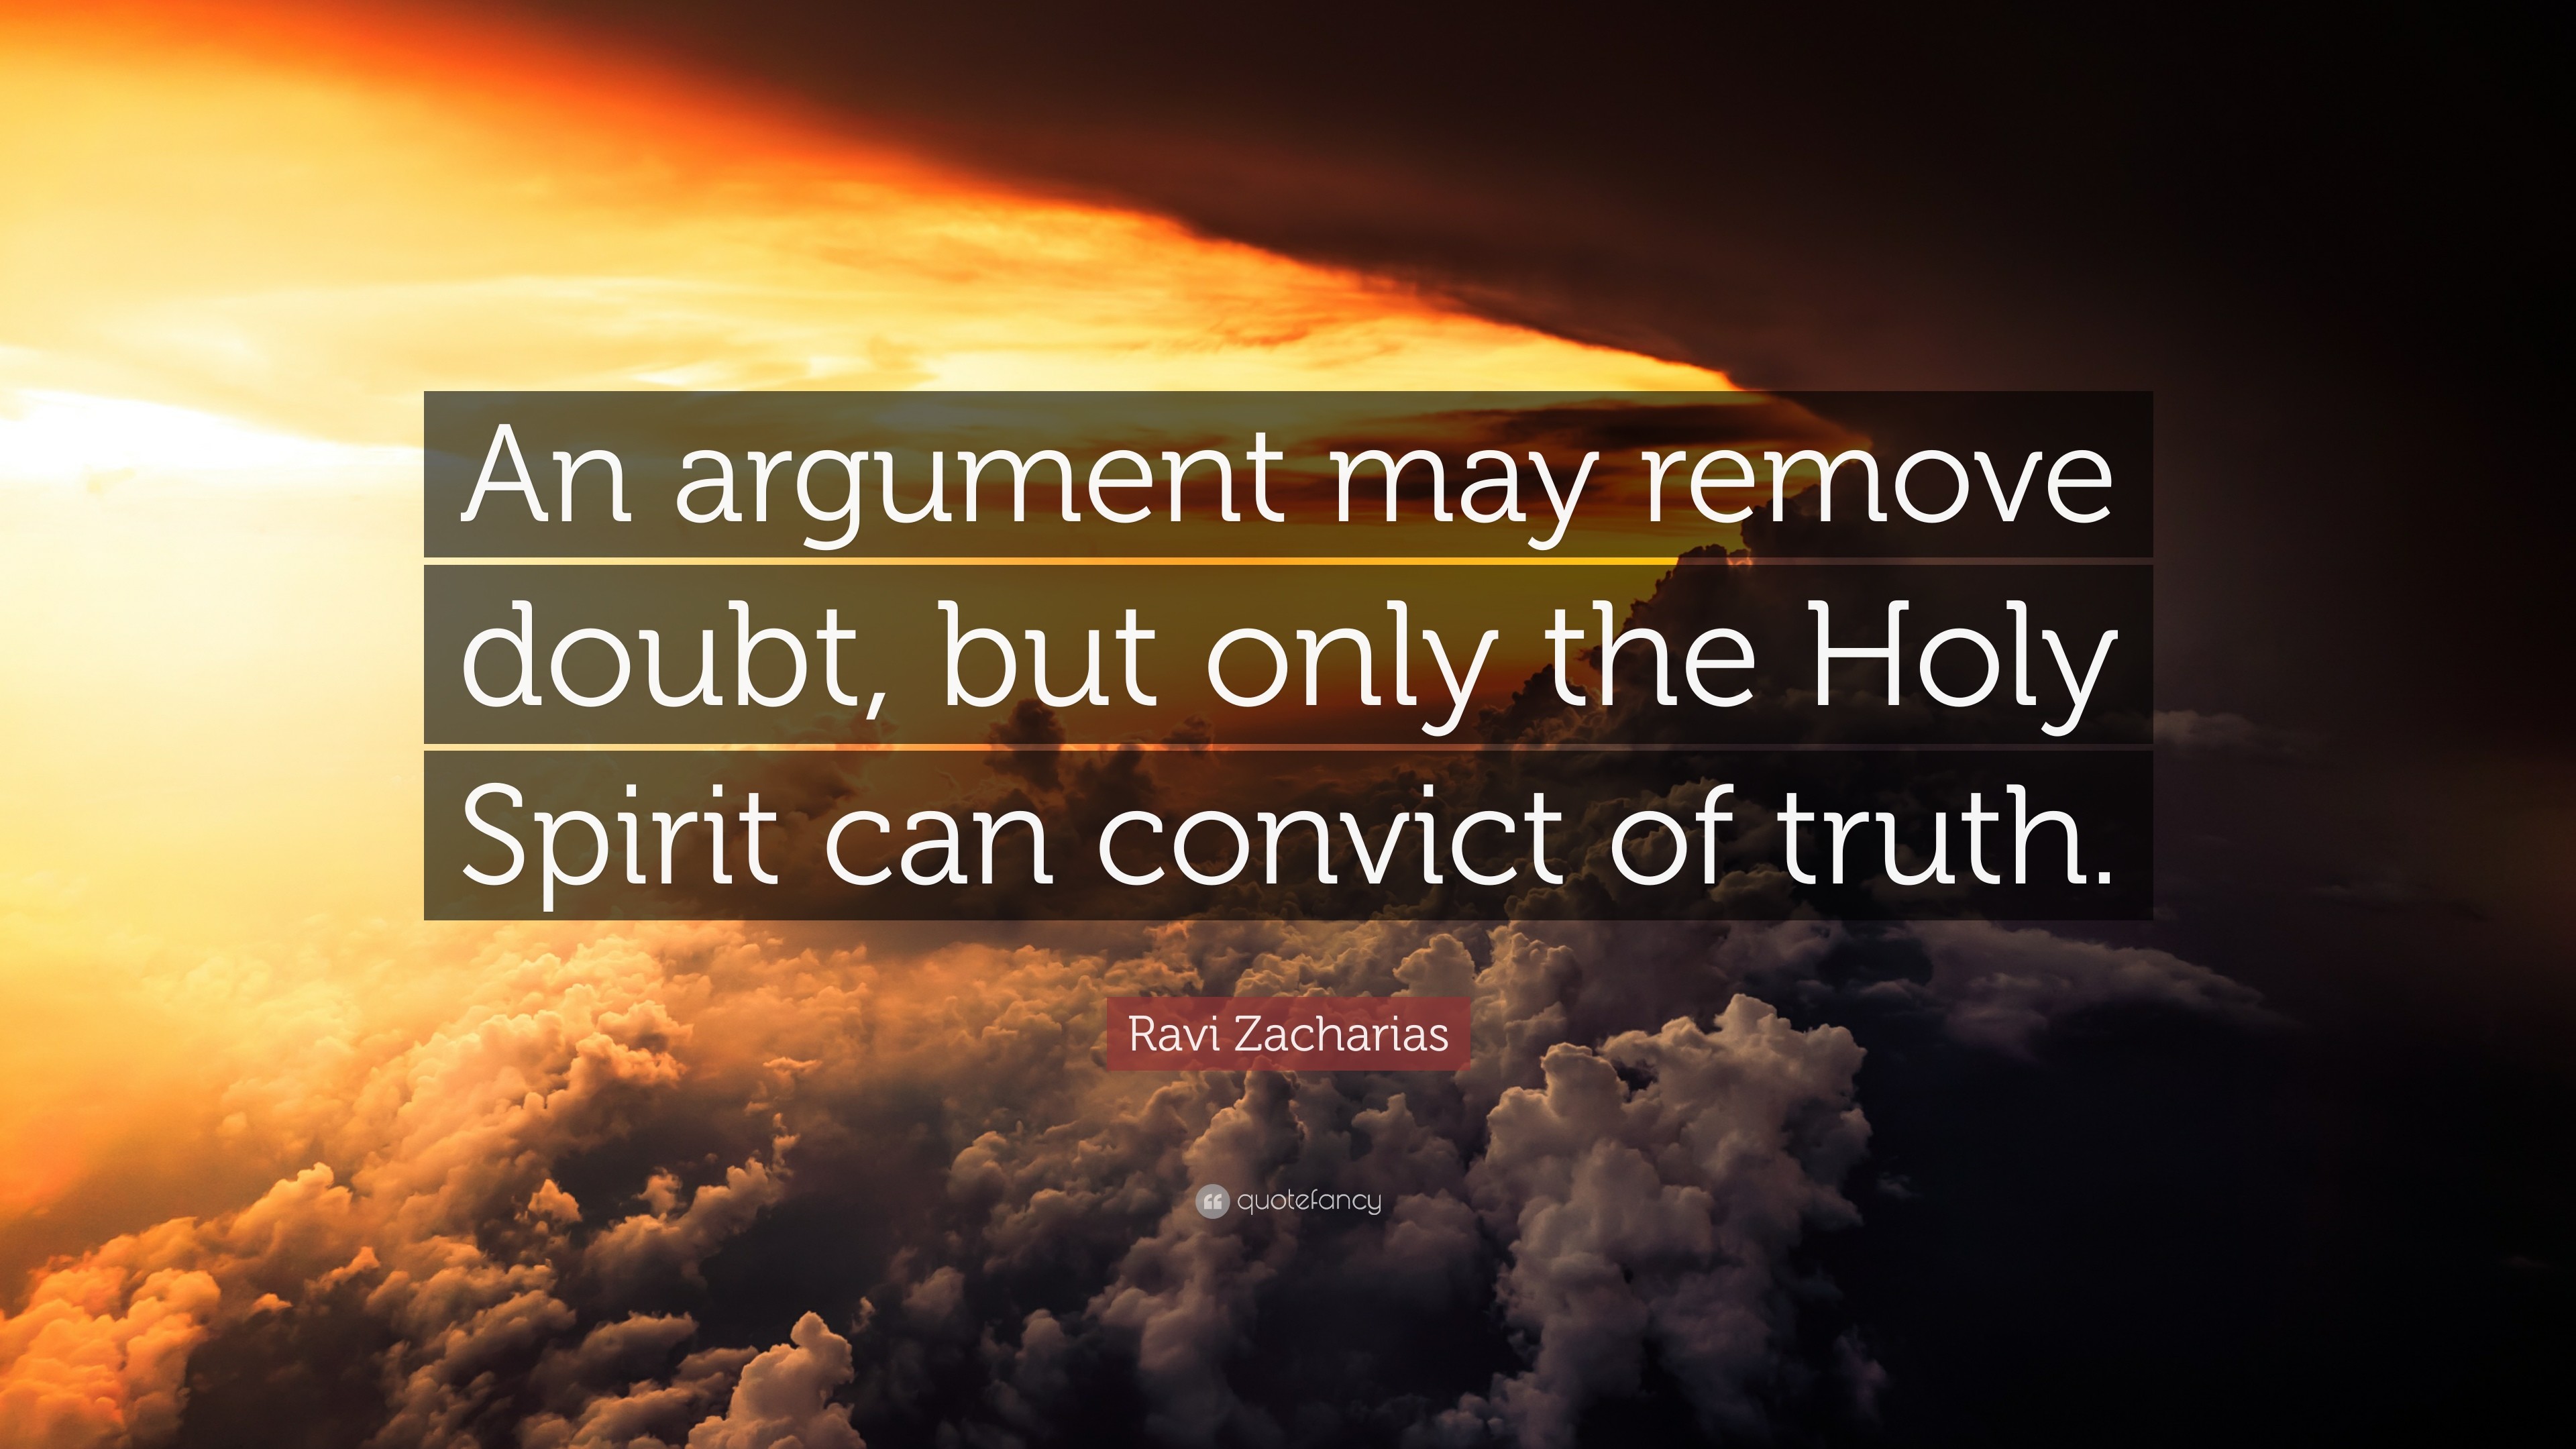 3840x2160 Ravi Zacharias Quote: “An argument may remove doubt, but only the Holy  Spirit